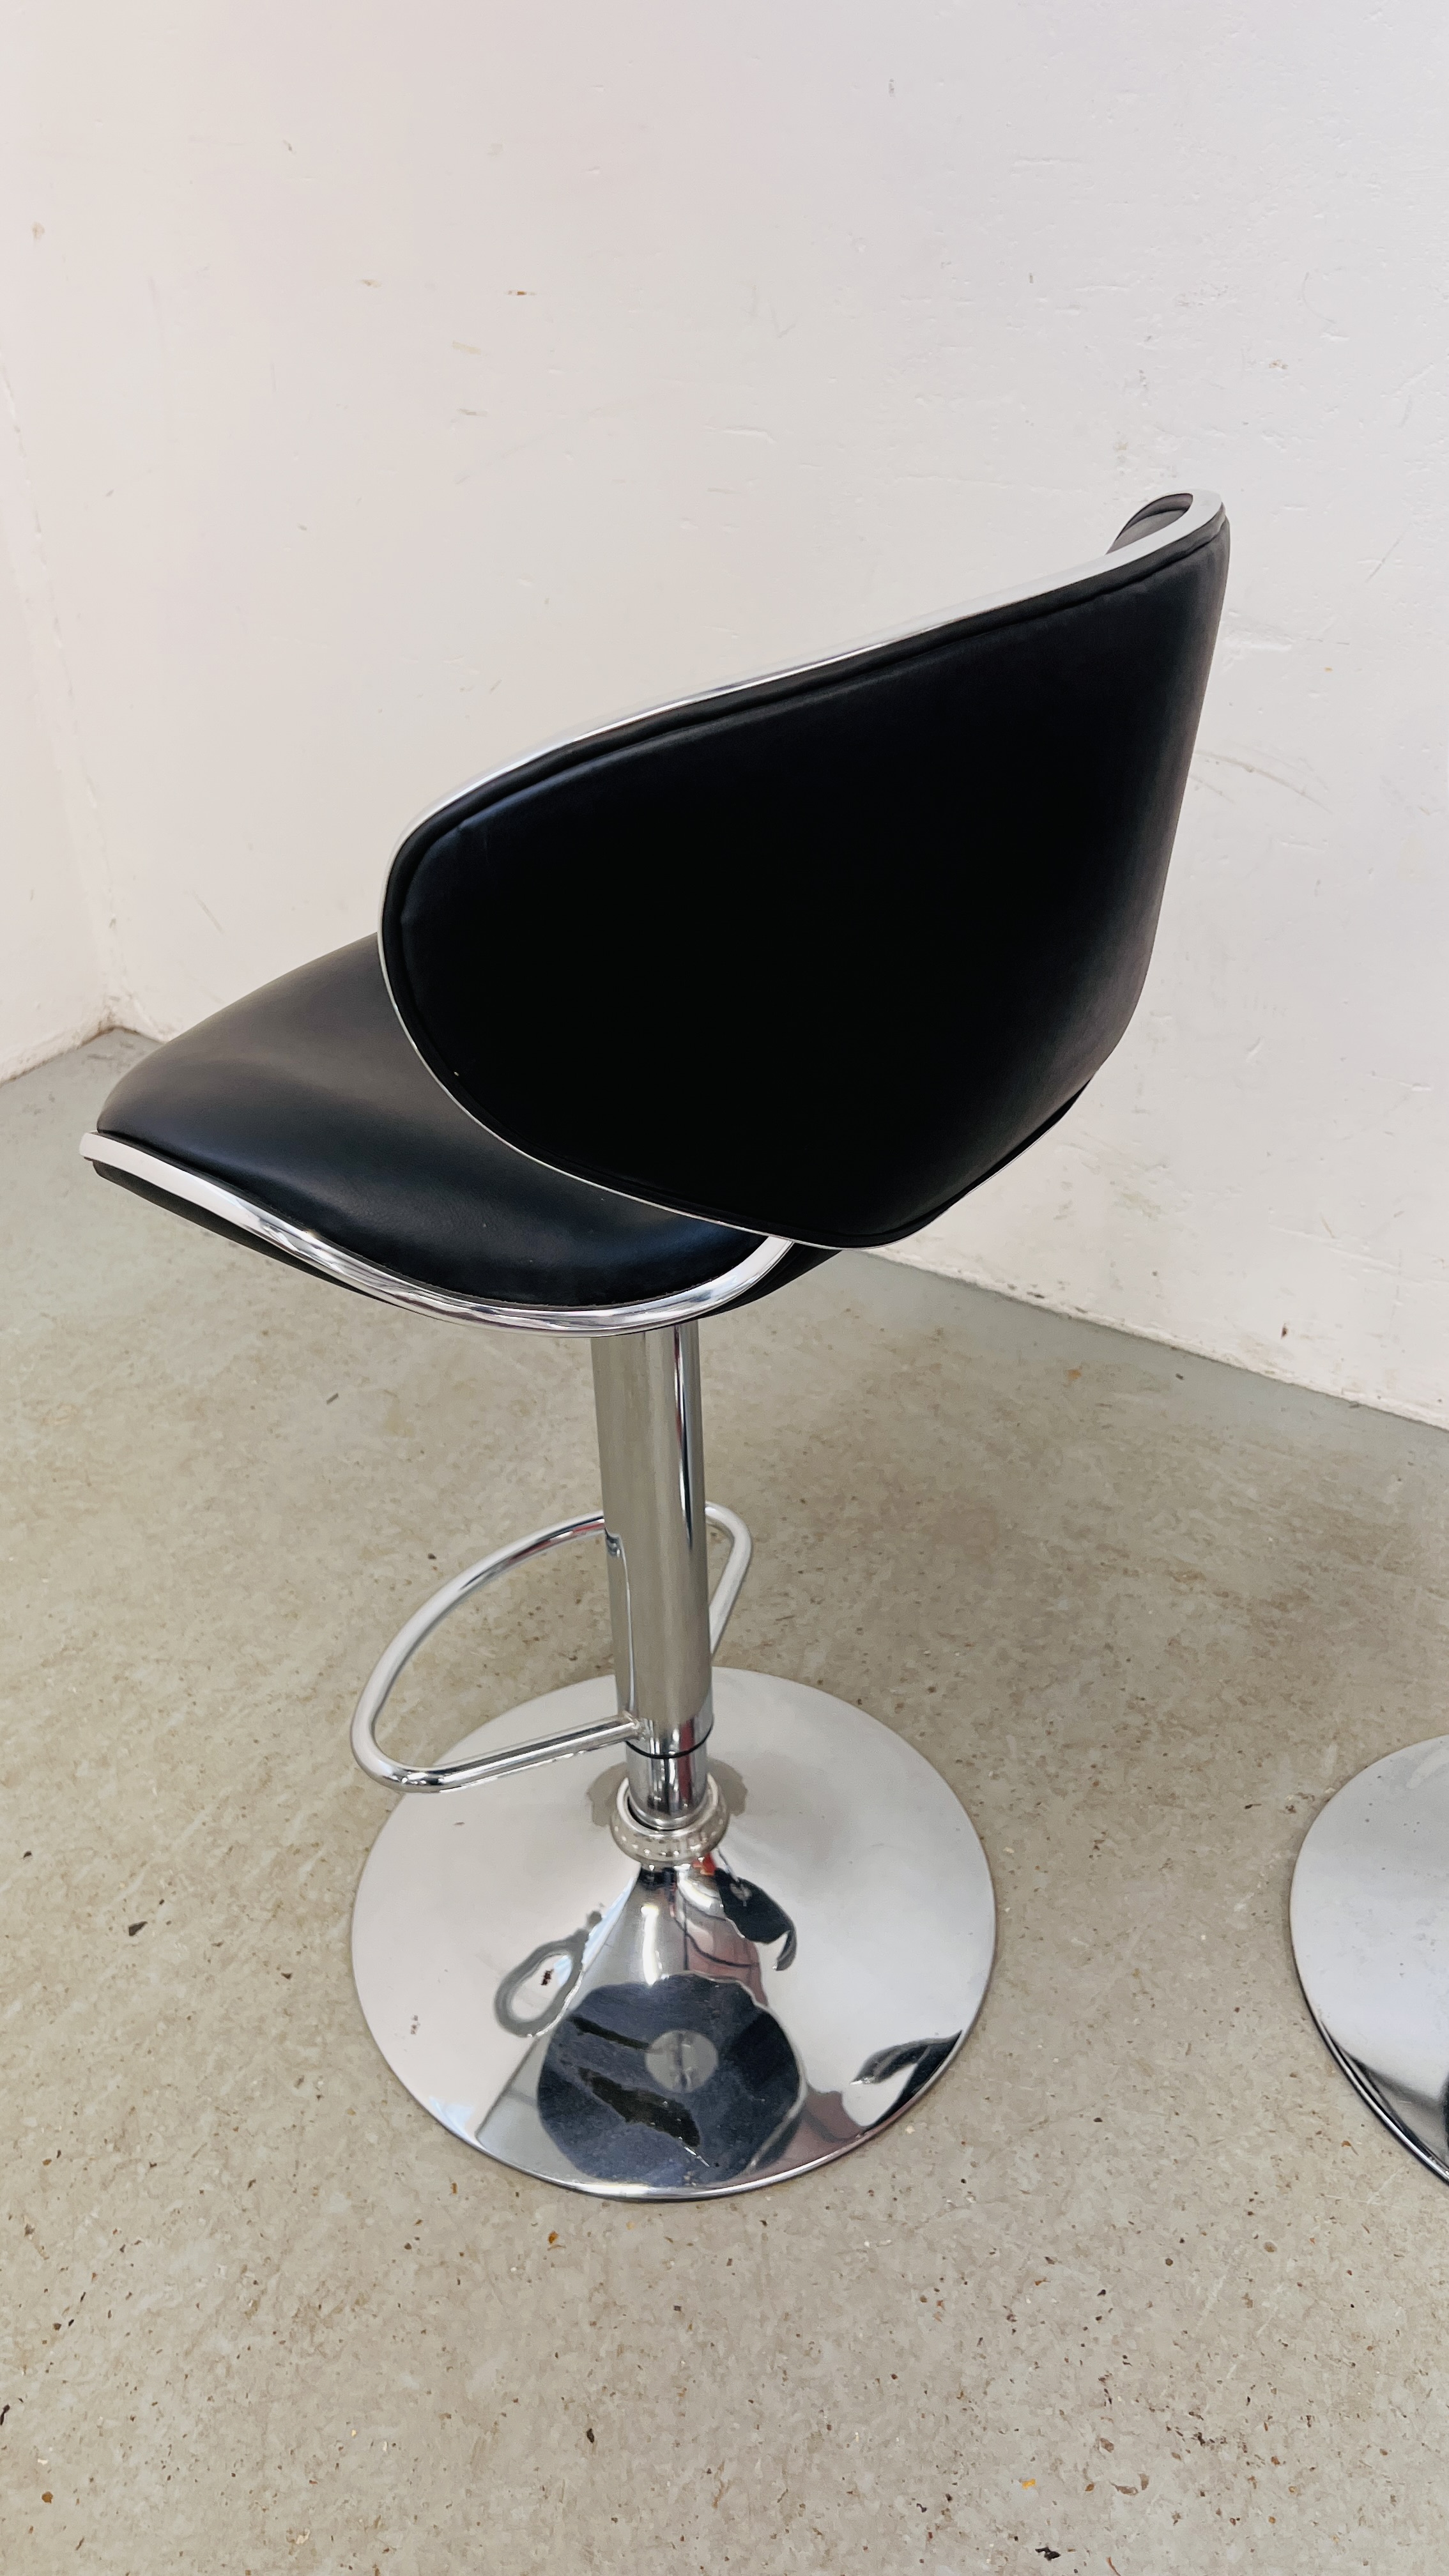 A PAIR OF CHROME FINISH RISE AND FALL BAR STOOLS - Image 9 of 9